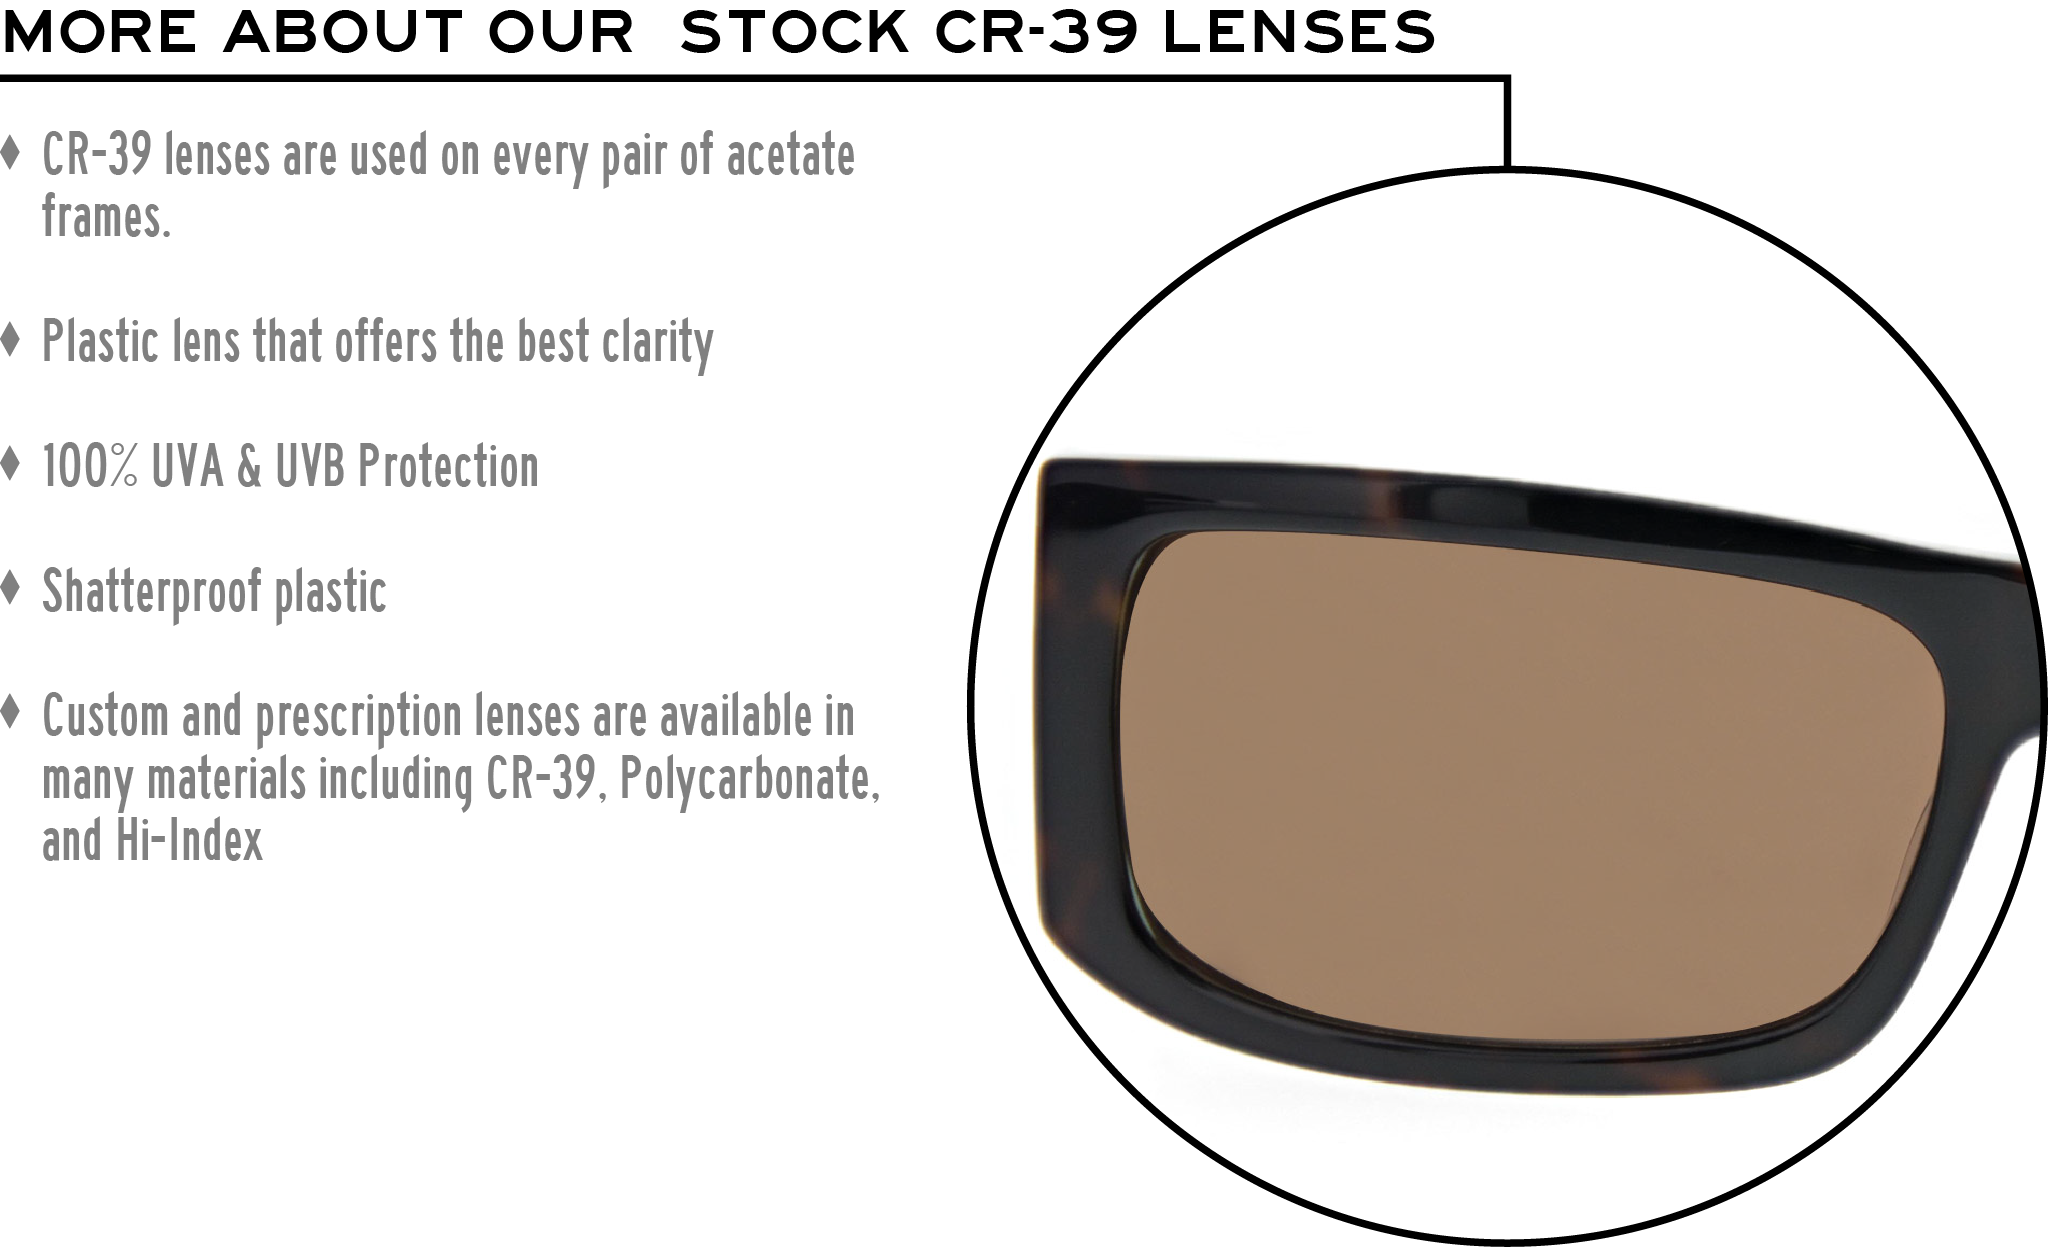 More about our stock cr-39 lenses: CR-39 lenses are used on every pair of acetate frames. Best plastic for clarity. 100% UVA & UVB protection. Shatterproof plastic. Custom and prescription lenses are available in many materials including CR-39, Polycarbonate, and Hi-Index.